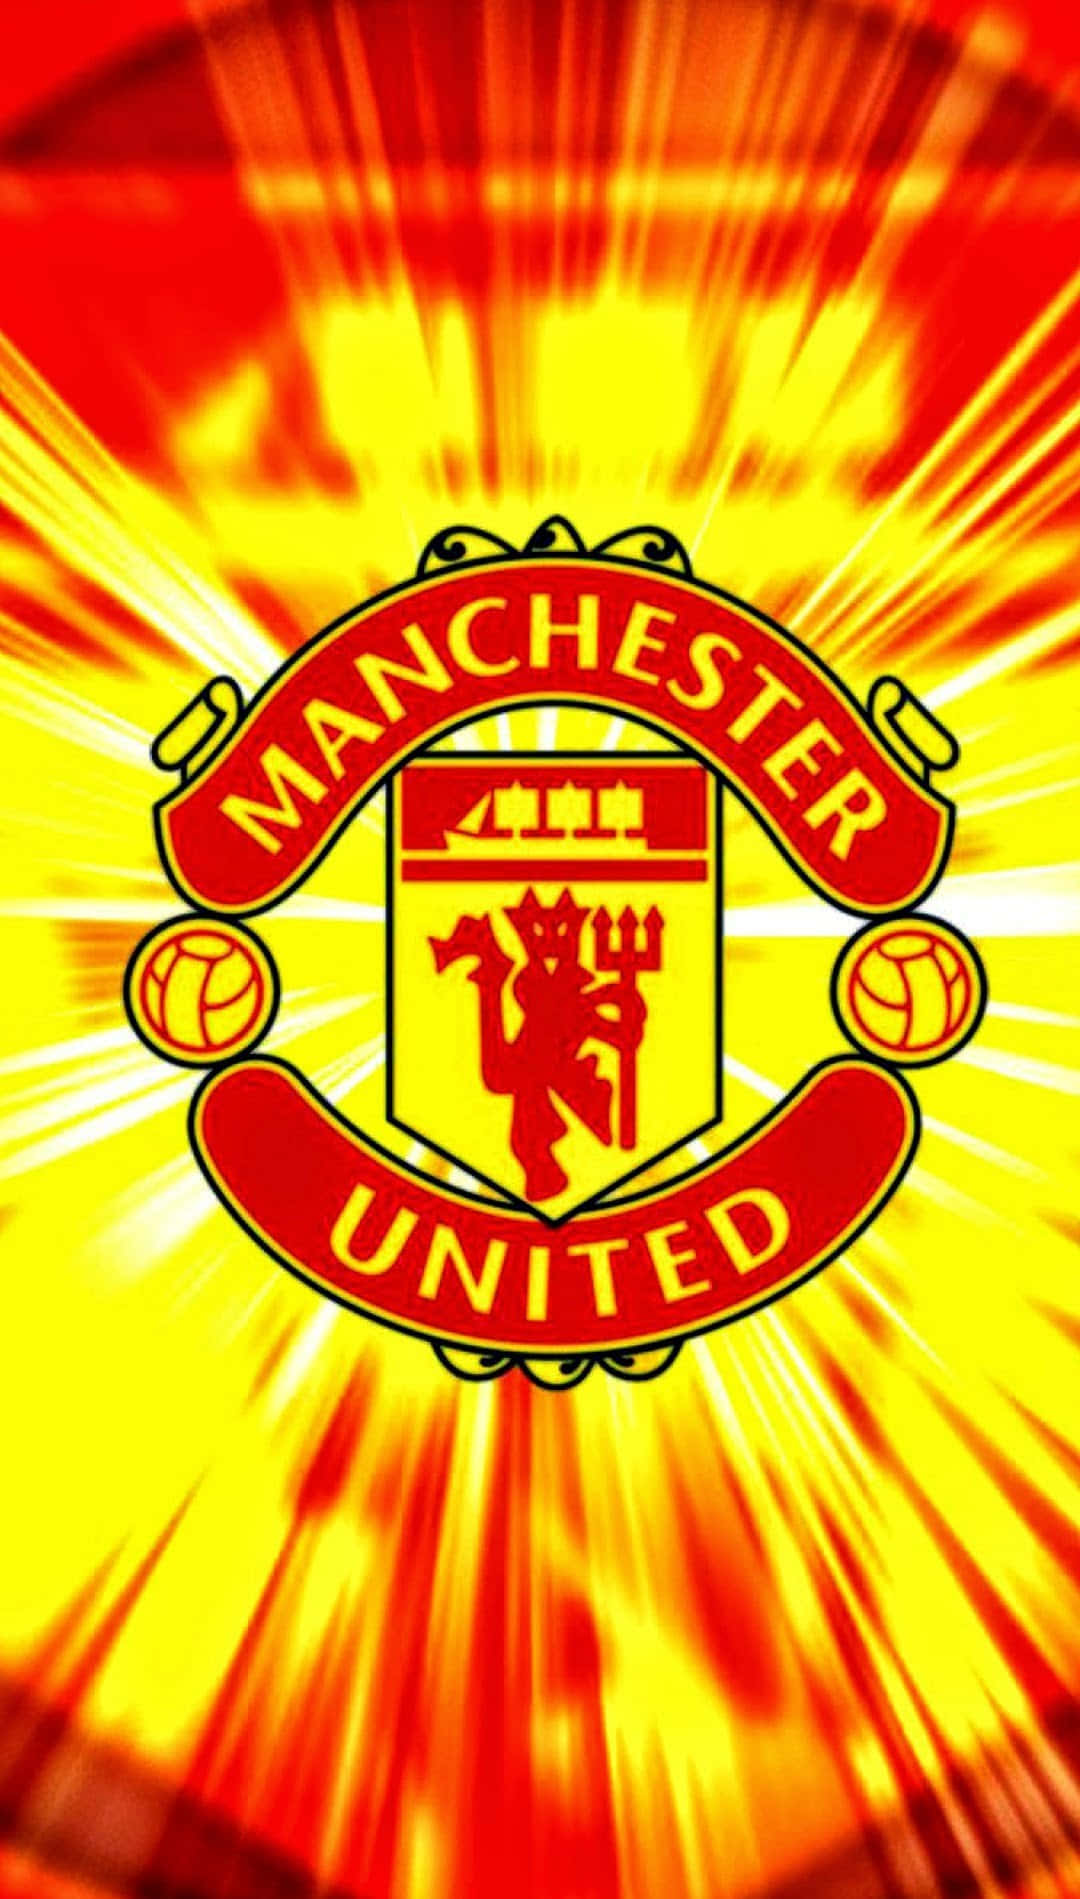 Download This Free Manchester United Iphone Wallpaper Wallpaper